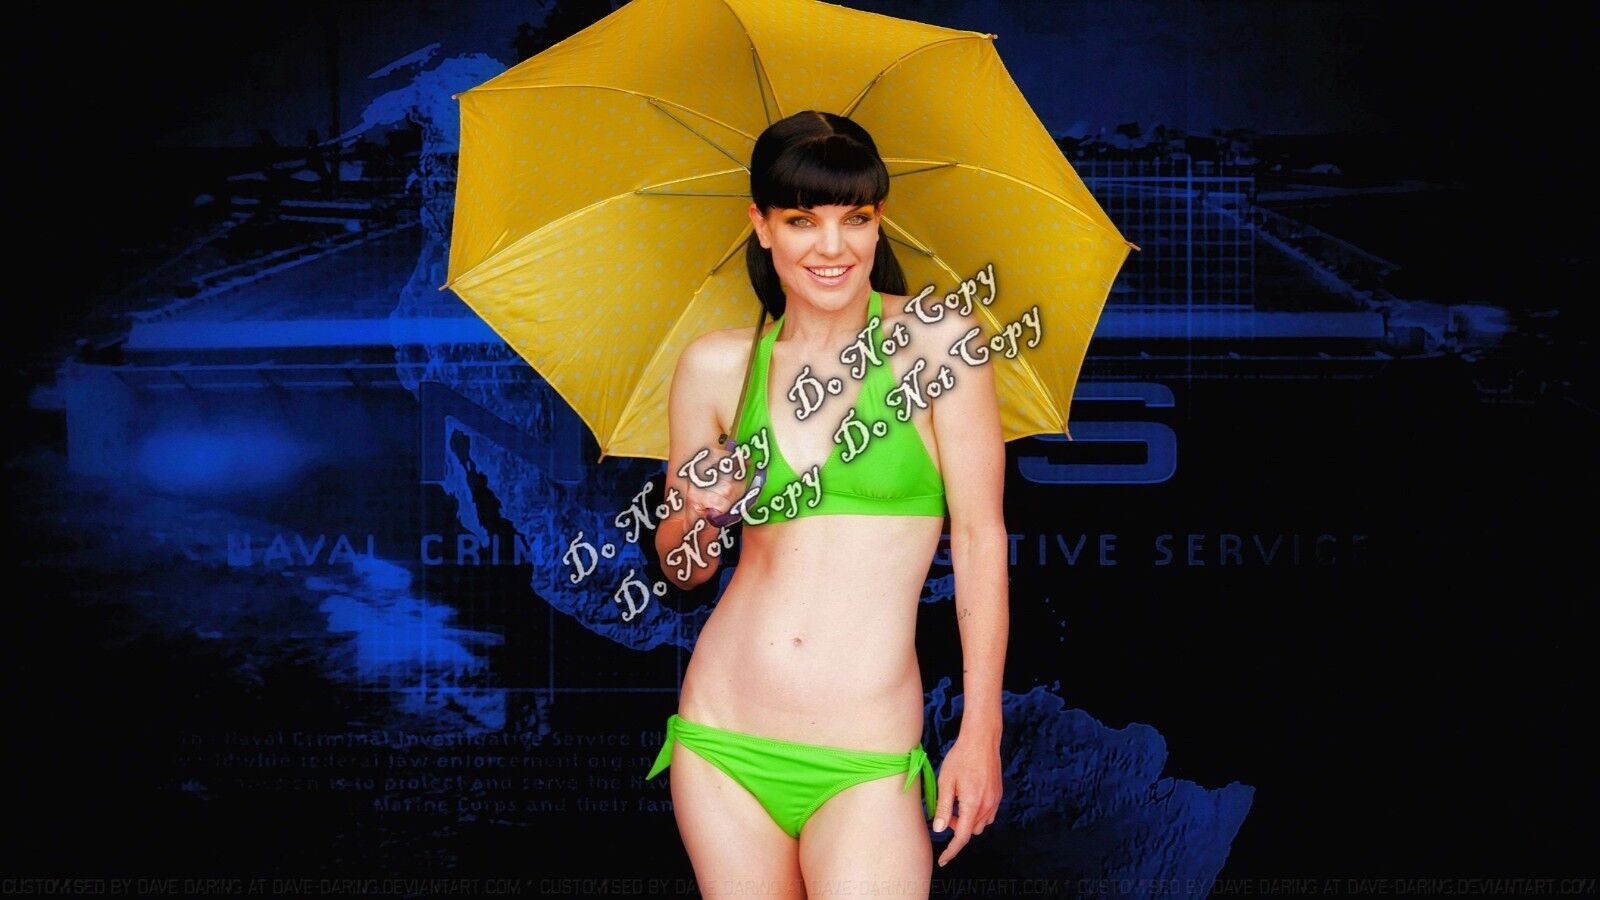 chad ikeda recommends pauley perrette bathing suit pic